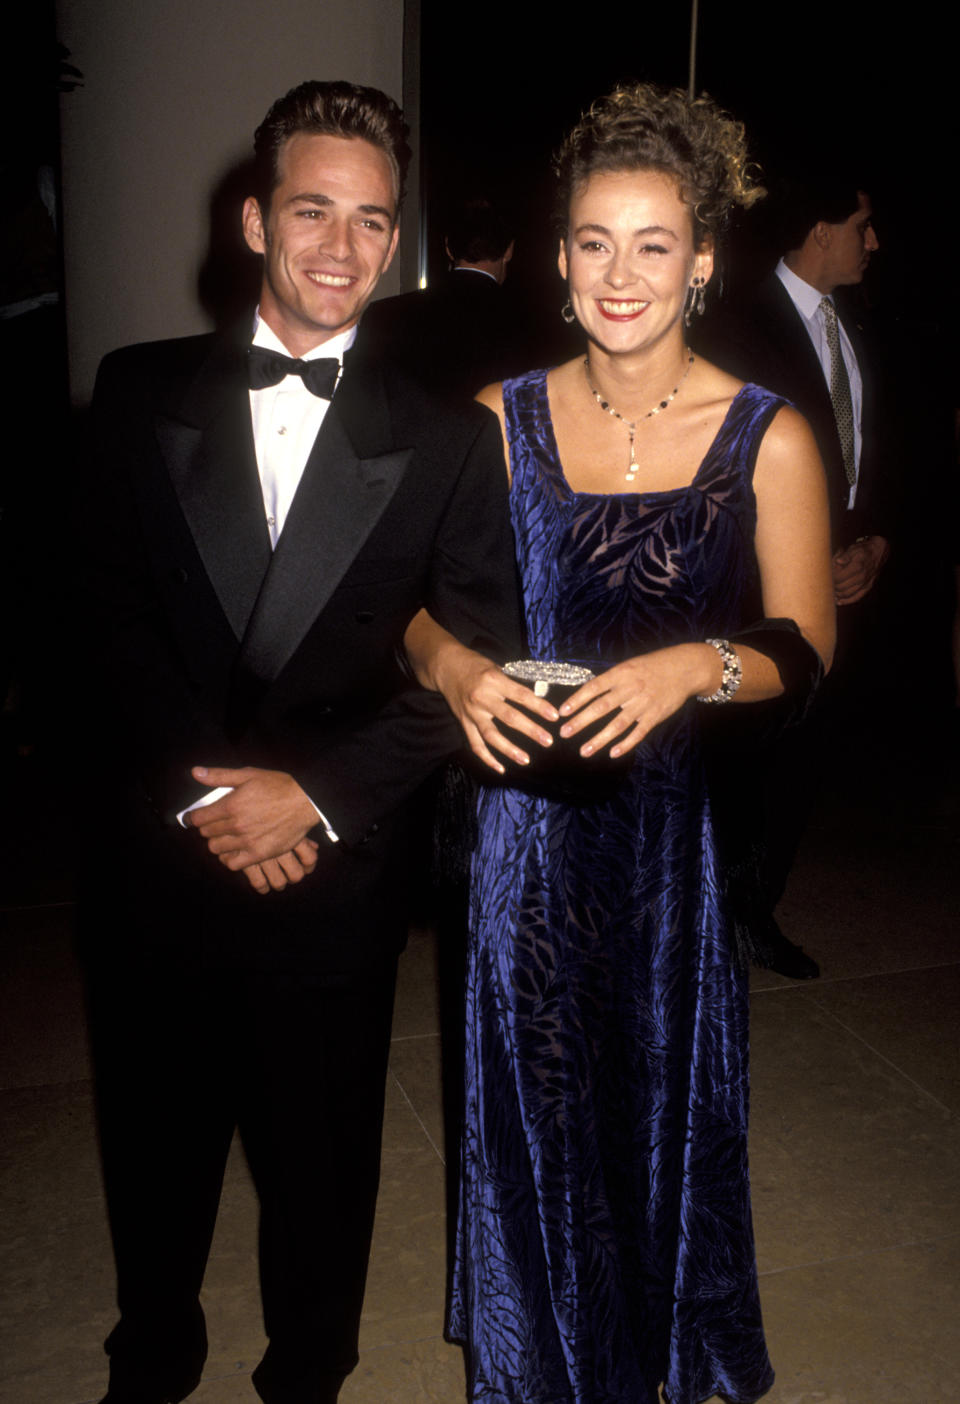 Luke Perry and Minnie Sharp in 1992 — one year before they were married. (Photo: Frank Trapper/Corbis via Getty Images)